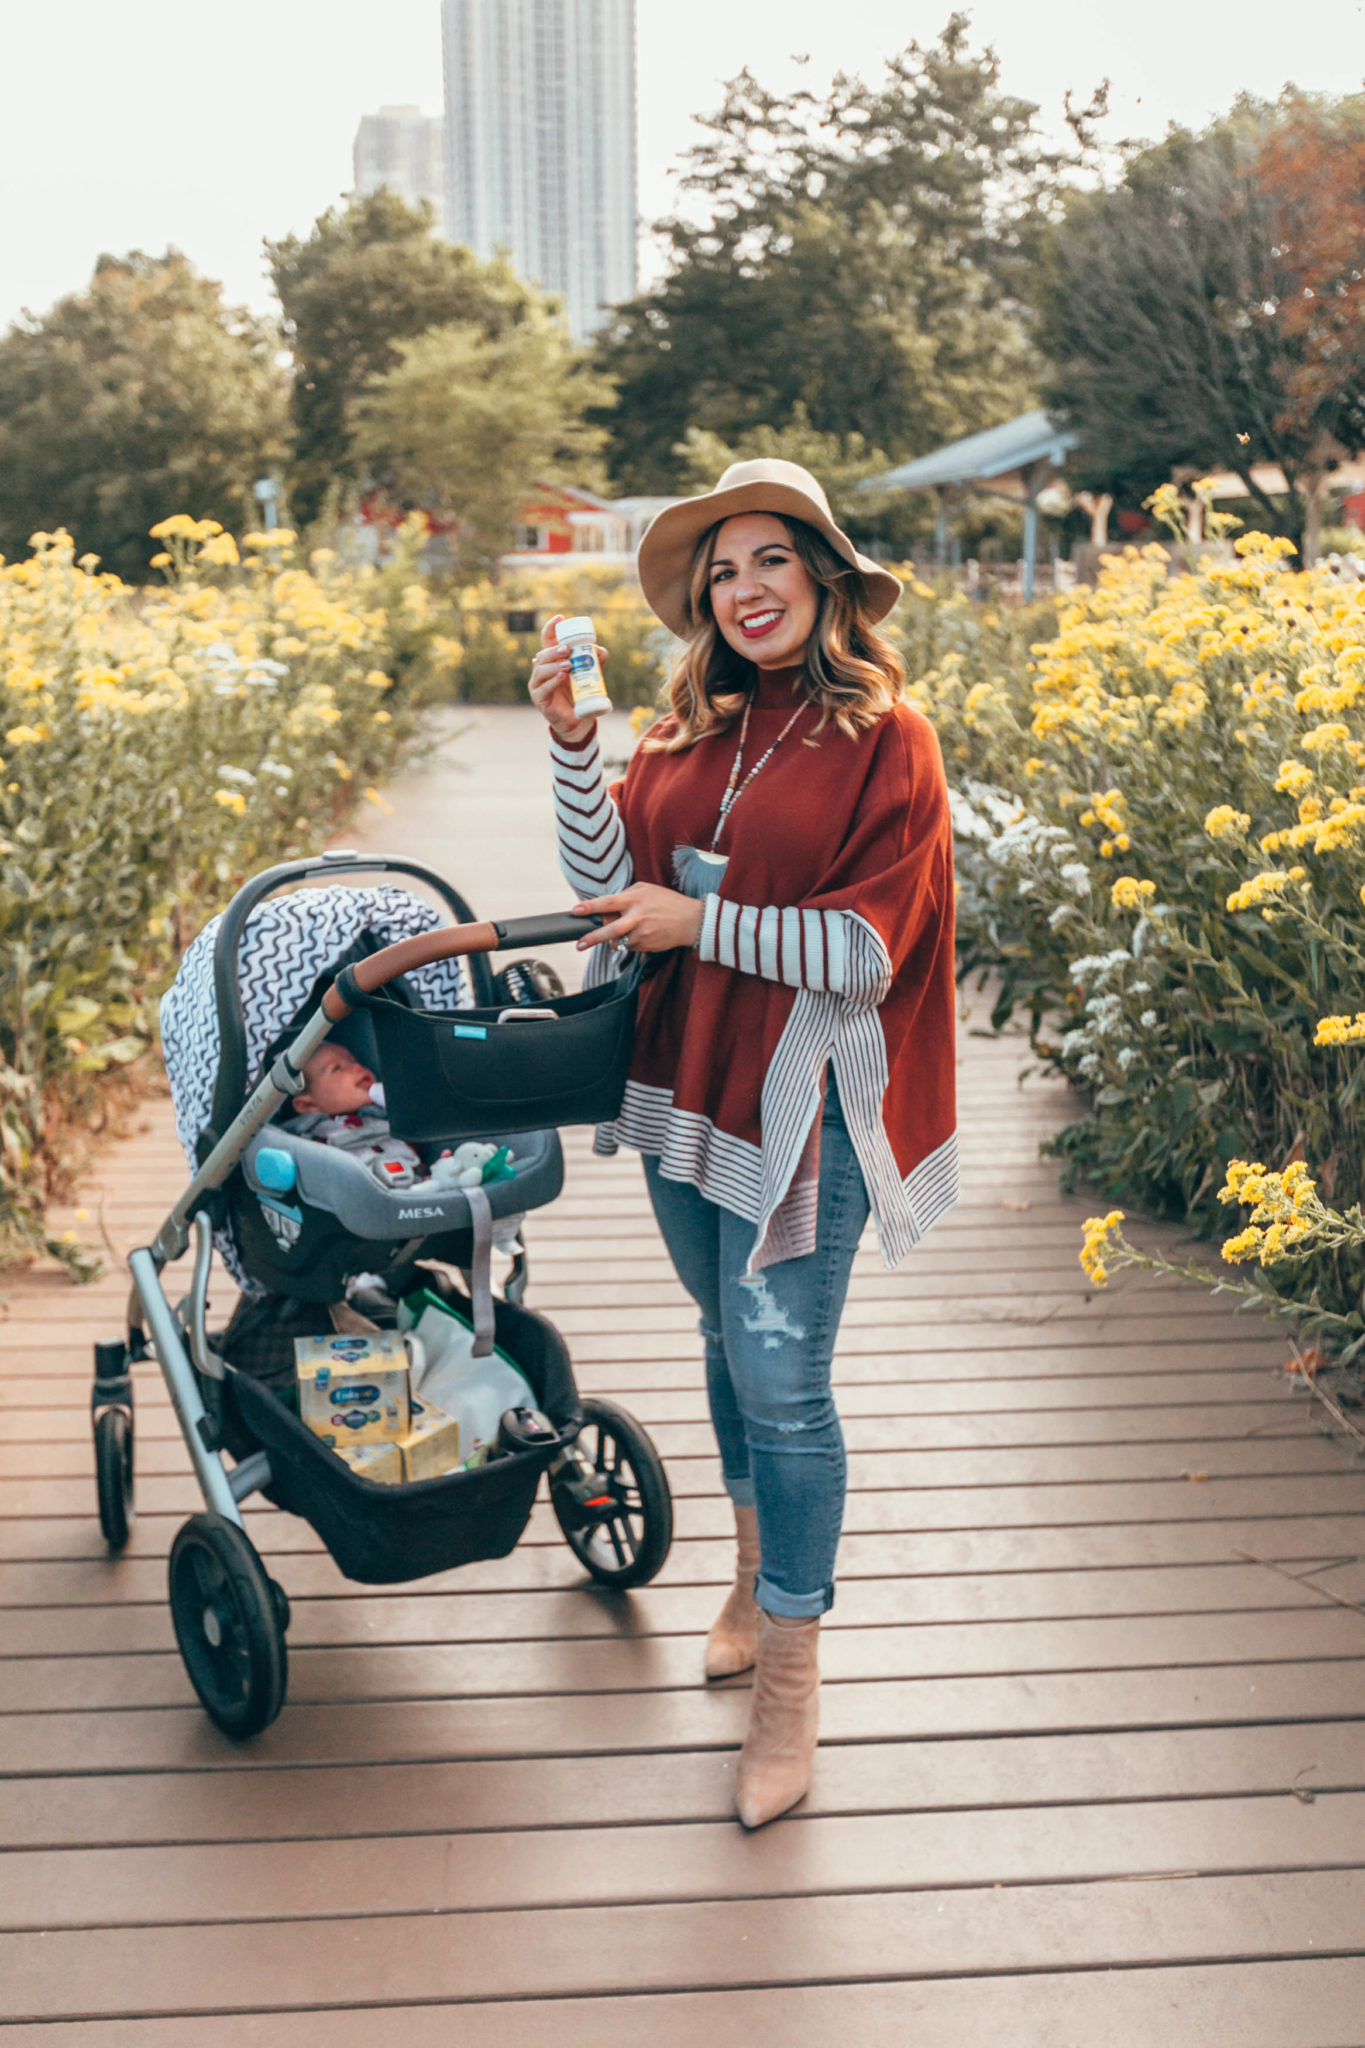 Enfamil NeuroPro Infant Formula Is My Baby Formula Choice by popular Chicago mom blog, Glass of Glam: image of a mom pushing her baby in a stroller outside and holding a bottle of Enfamil NeuroPro Infant Formula. 